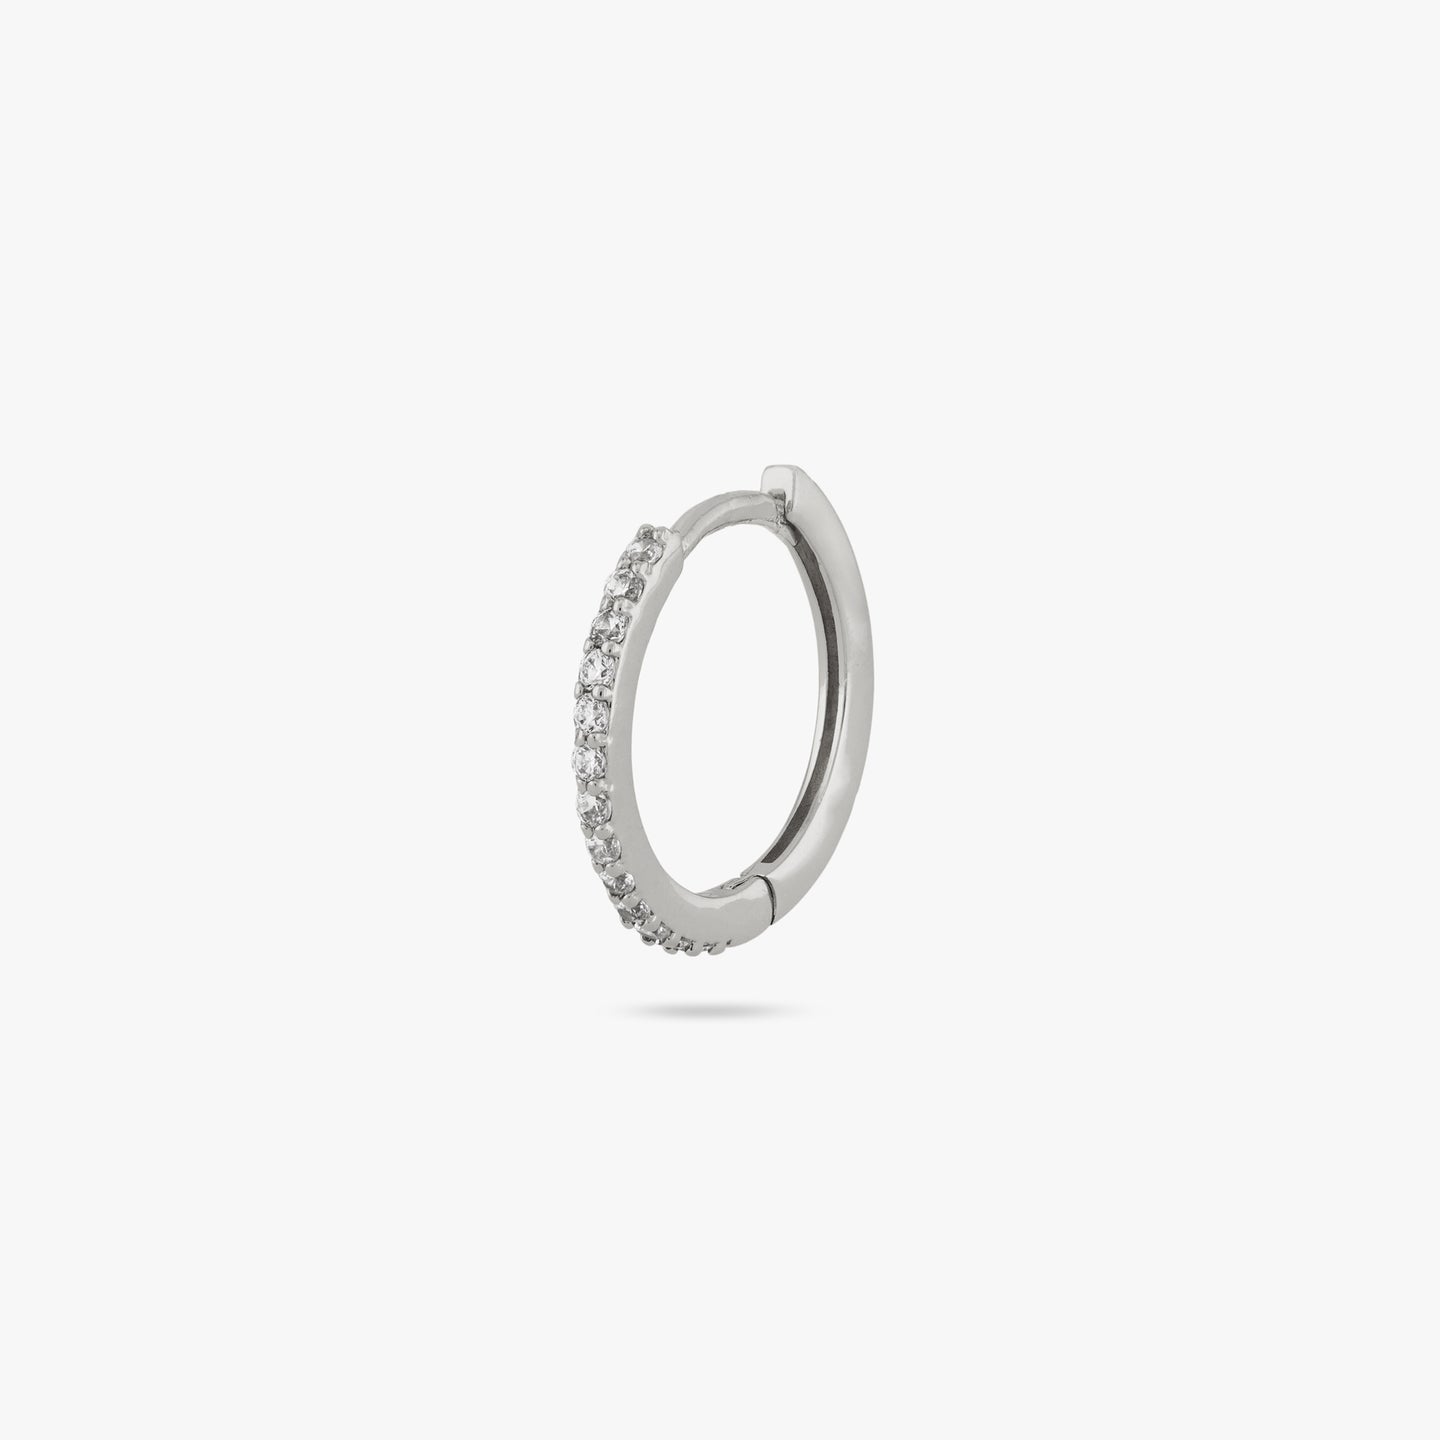 This is a small silver hoop with clear cz gems along the front color:null|silver/clear